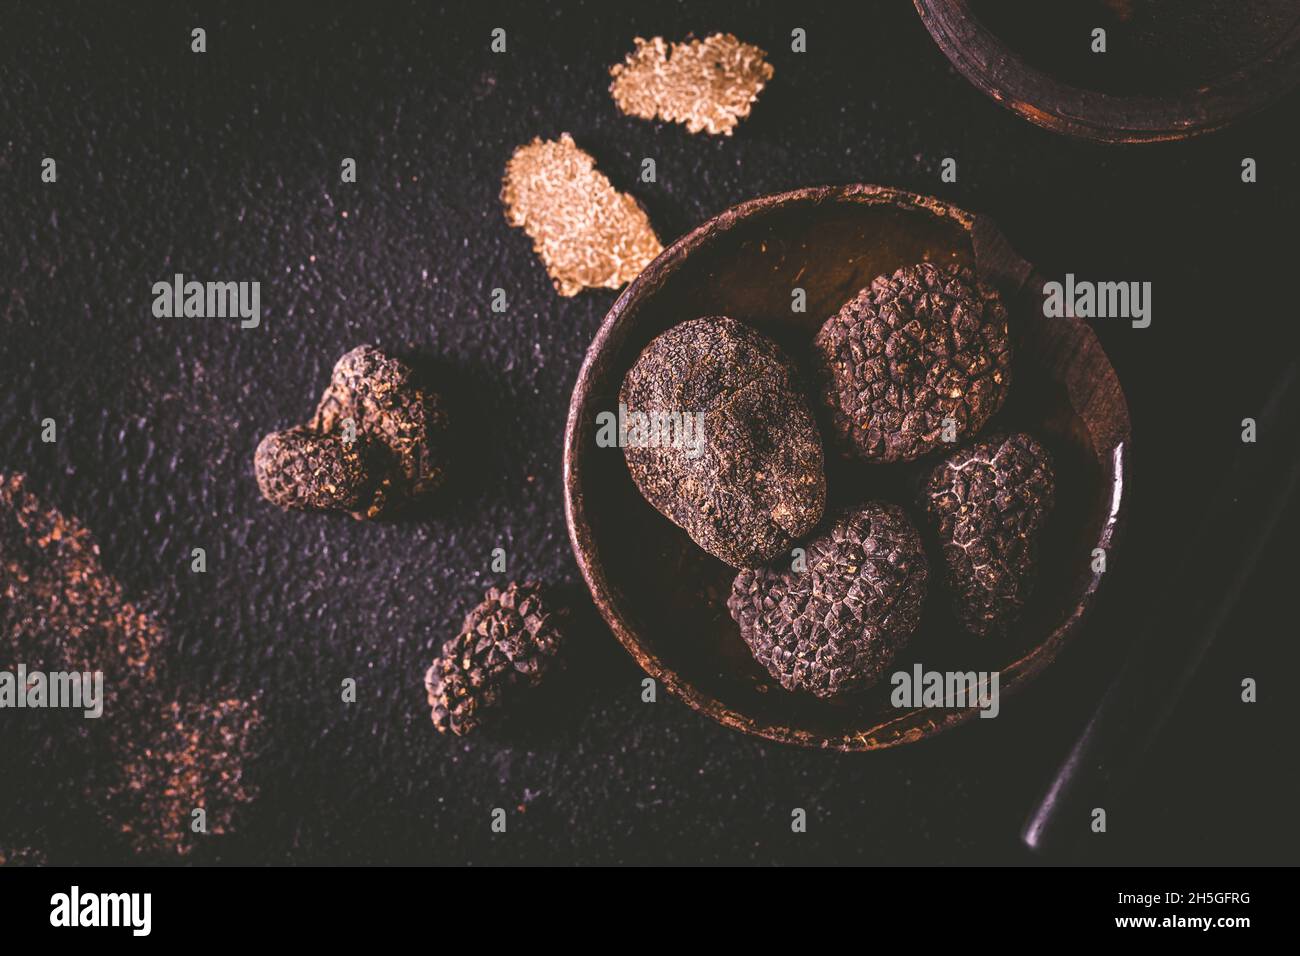 Black truffle in bowl on dark background, cooking delicacy Stock Photo